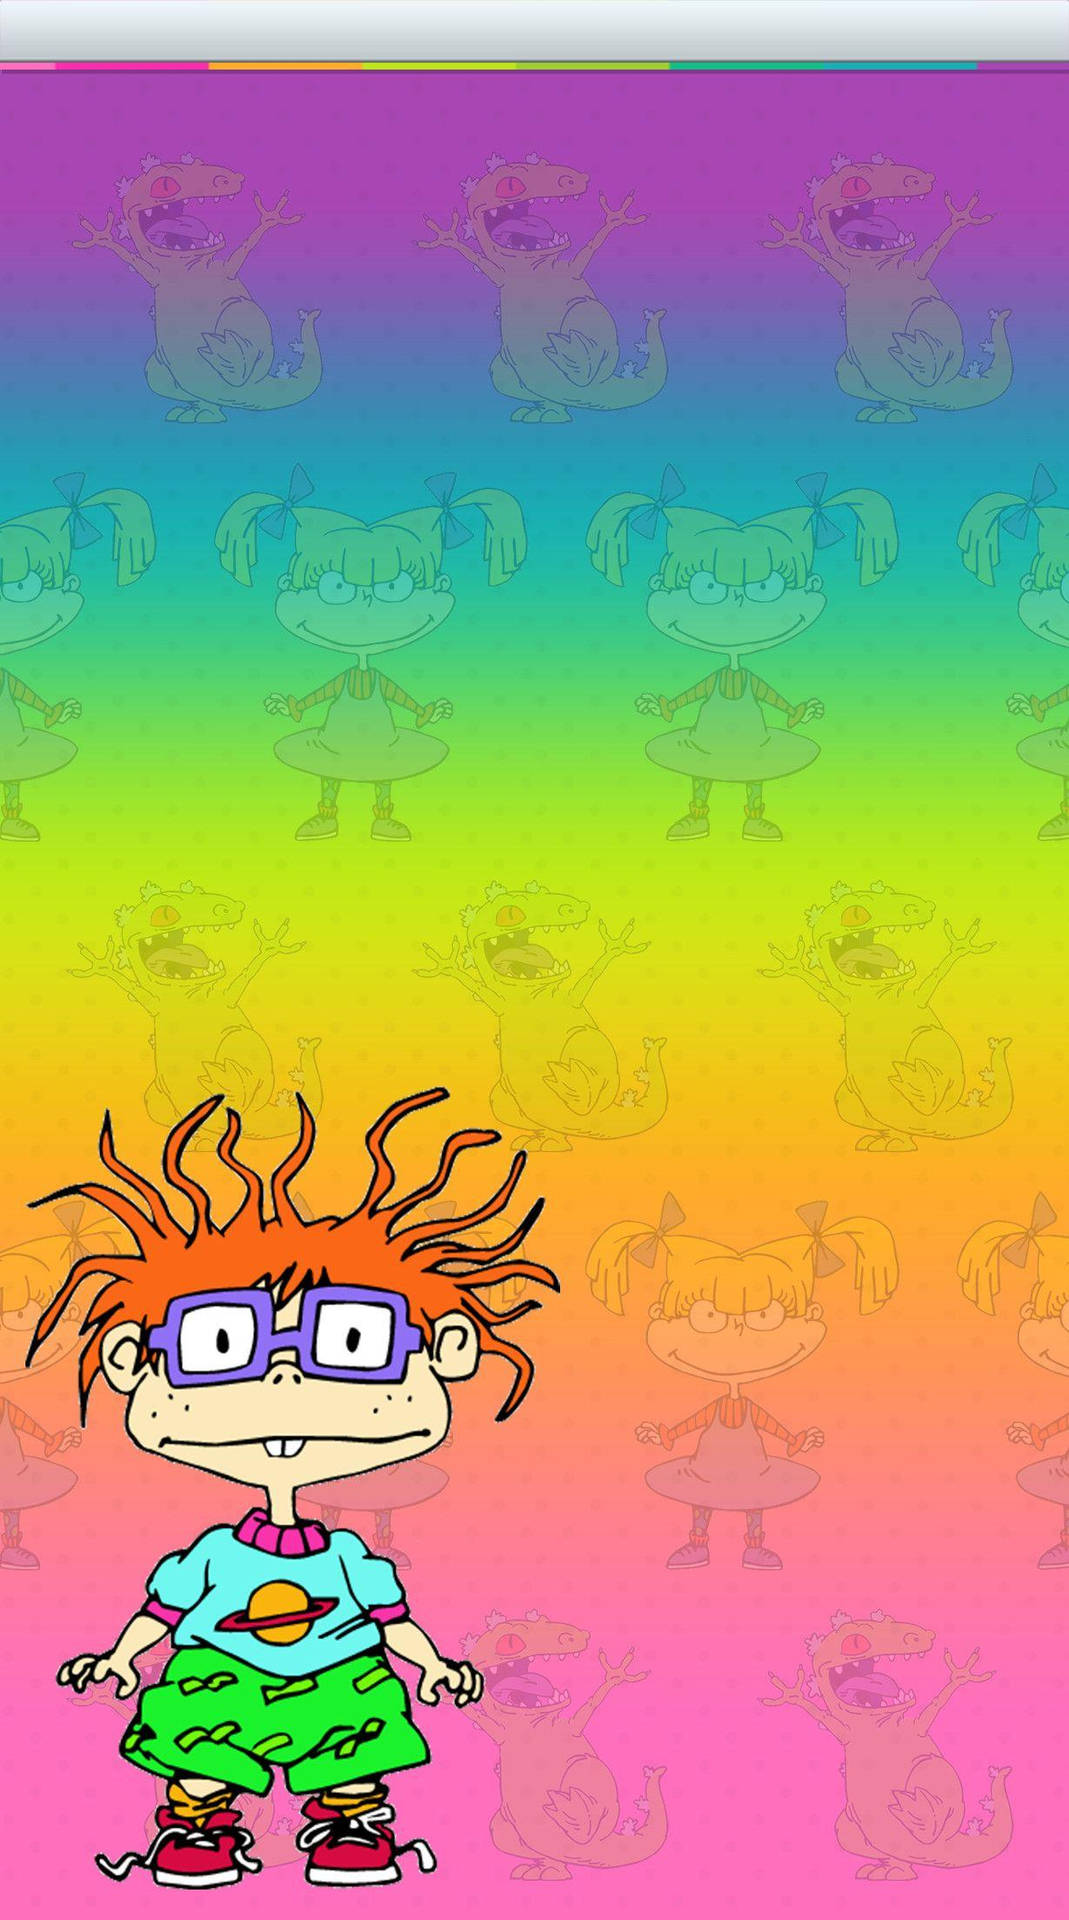 A Cartoon Girl With Glasses And A Rainbow Background Wallpaper